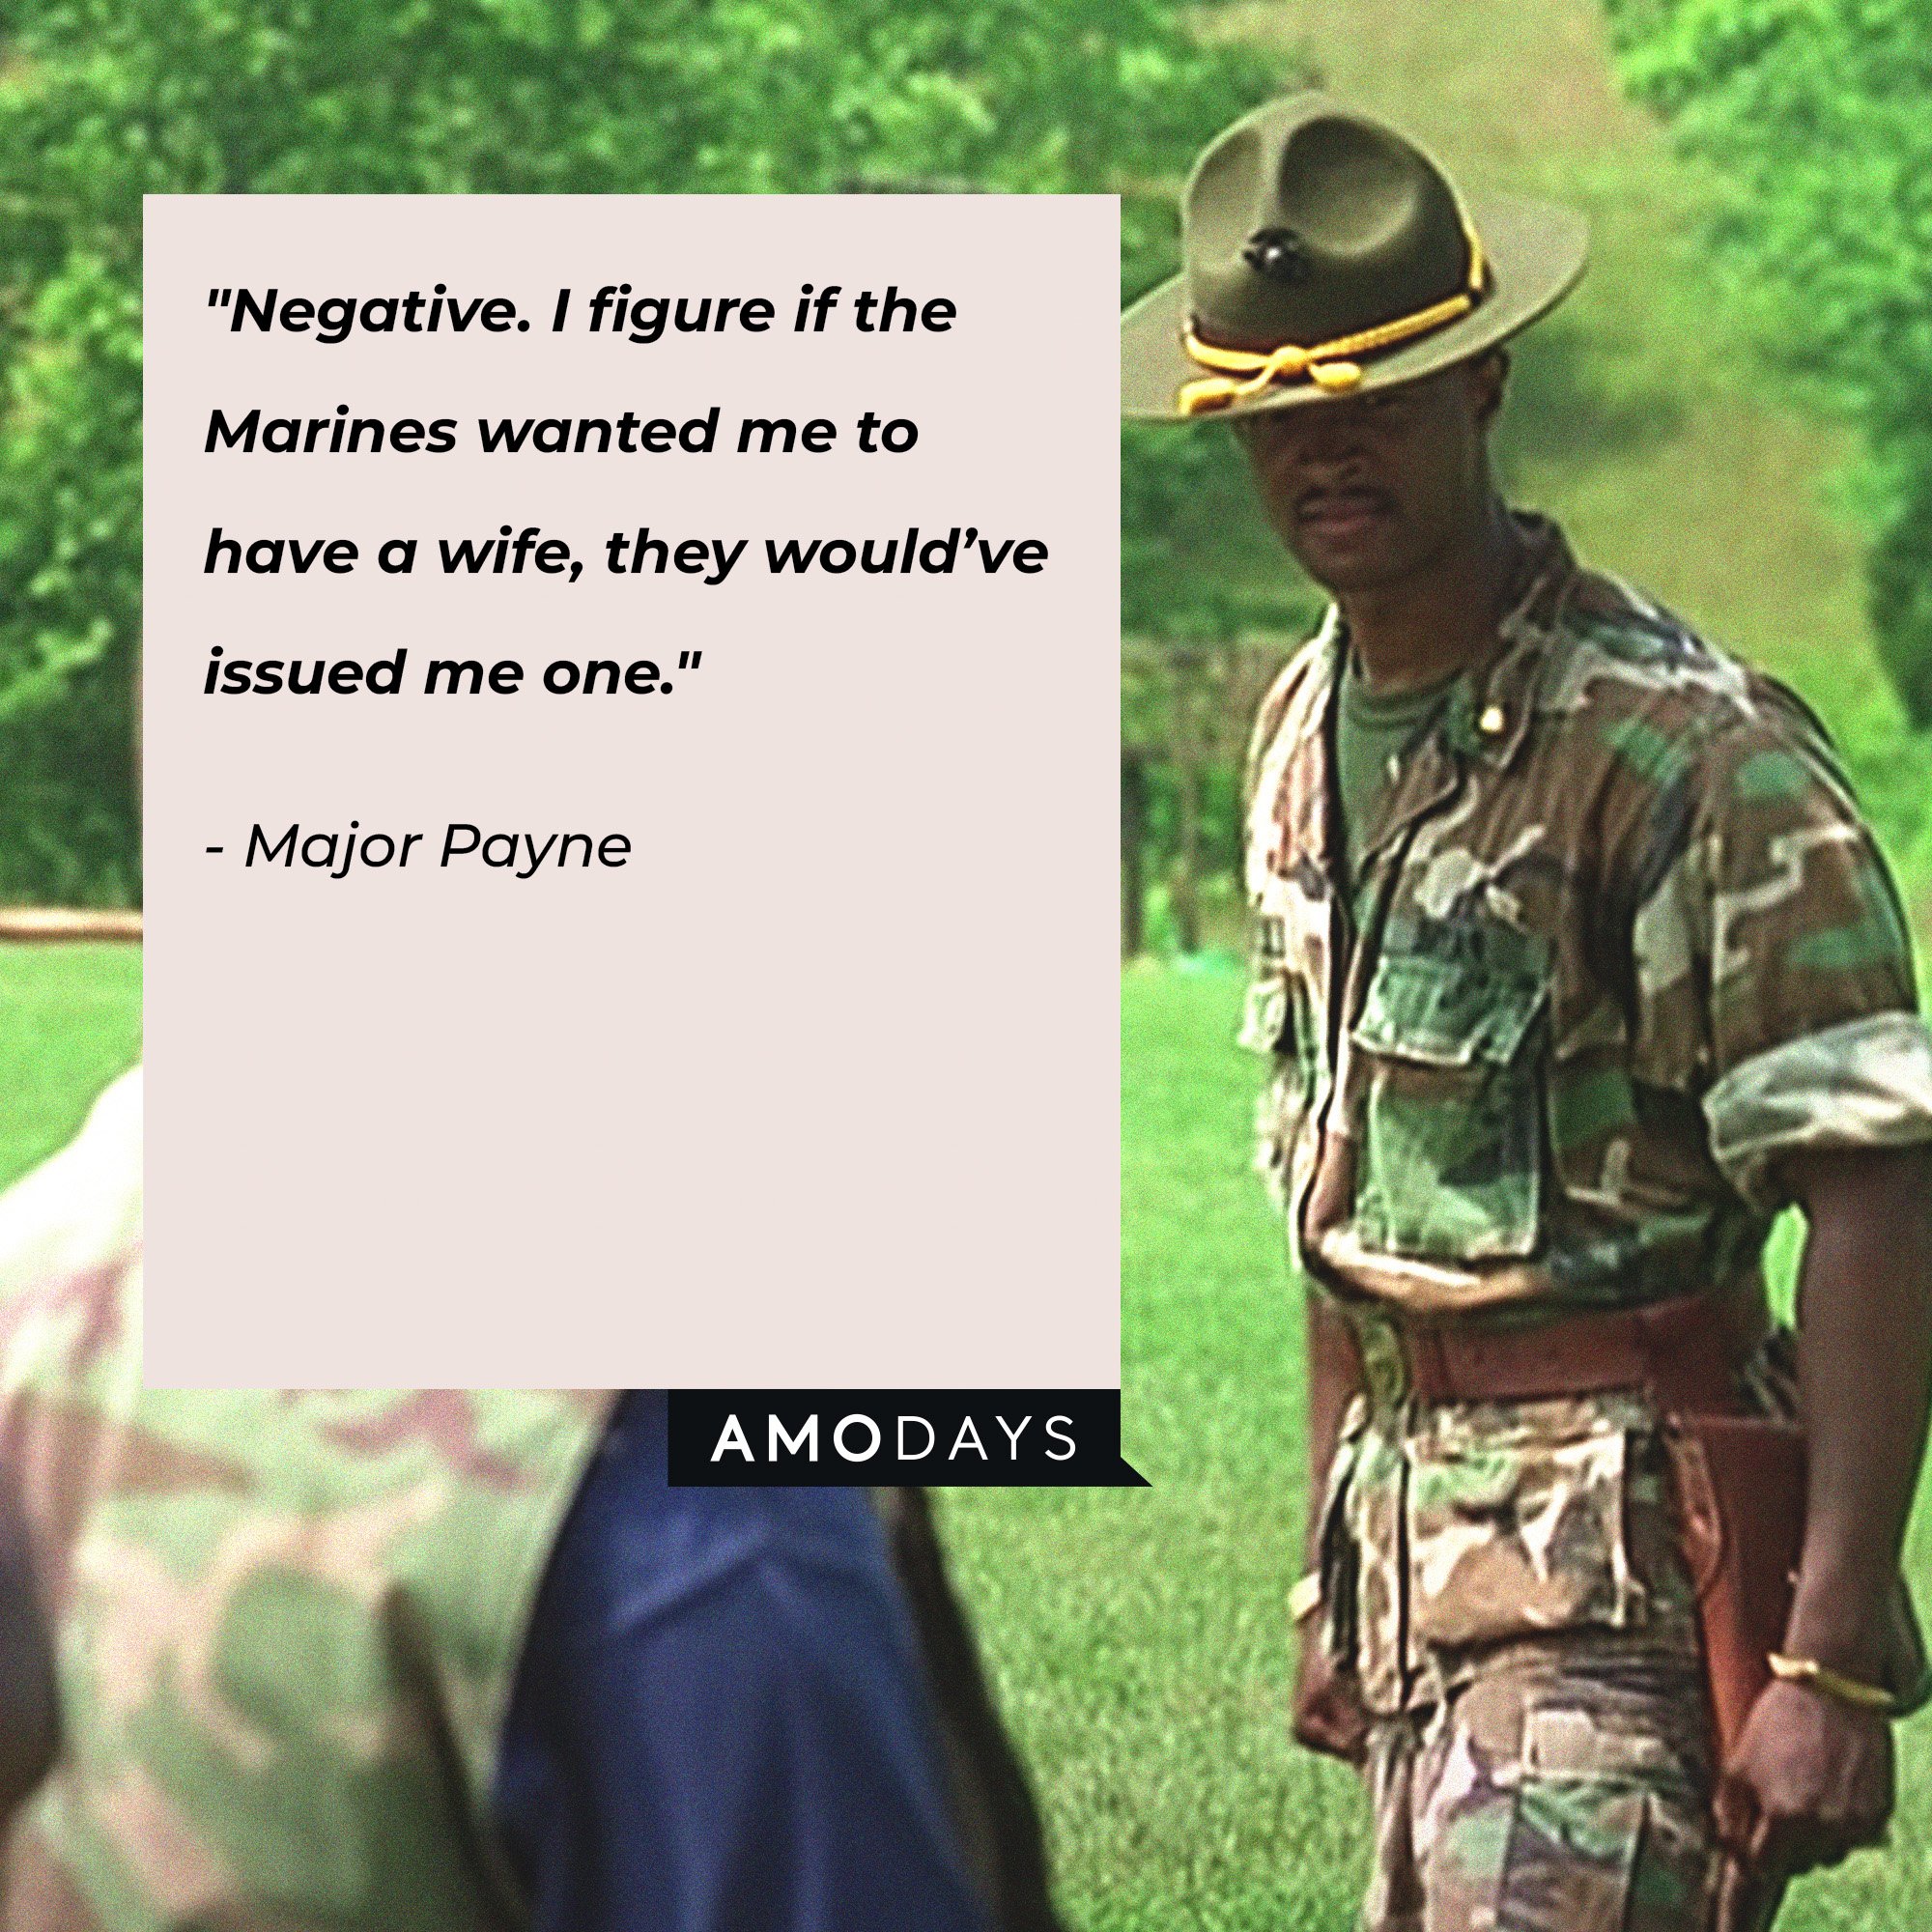 Major Payne's quote: "Negative. I figure if the Marines wanted me to have a wife, they would've issued me one." | Source: Amodays